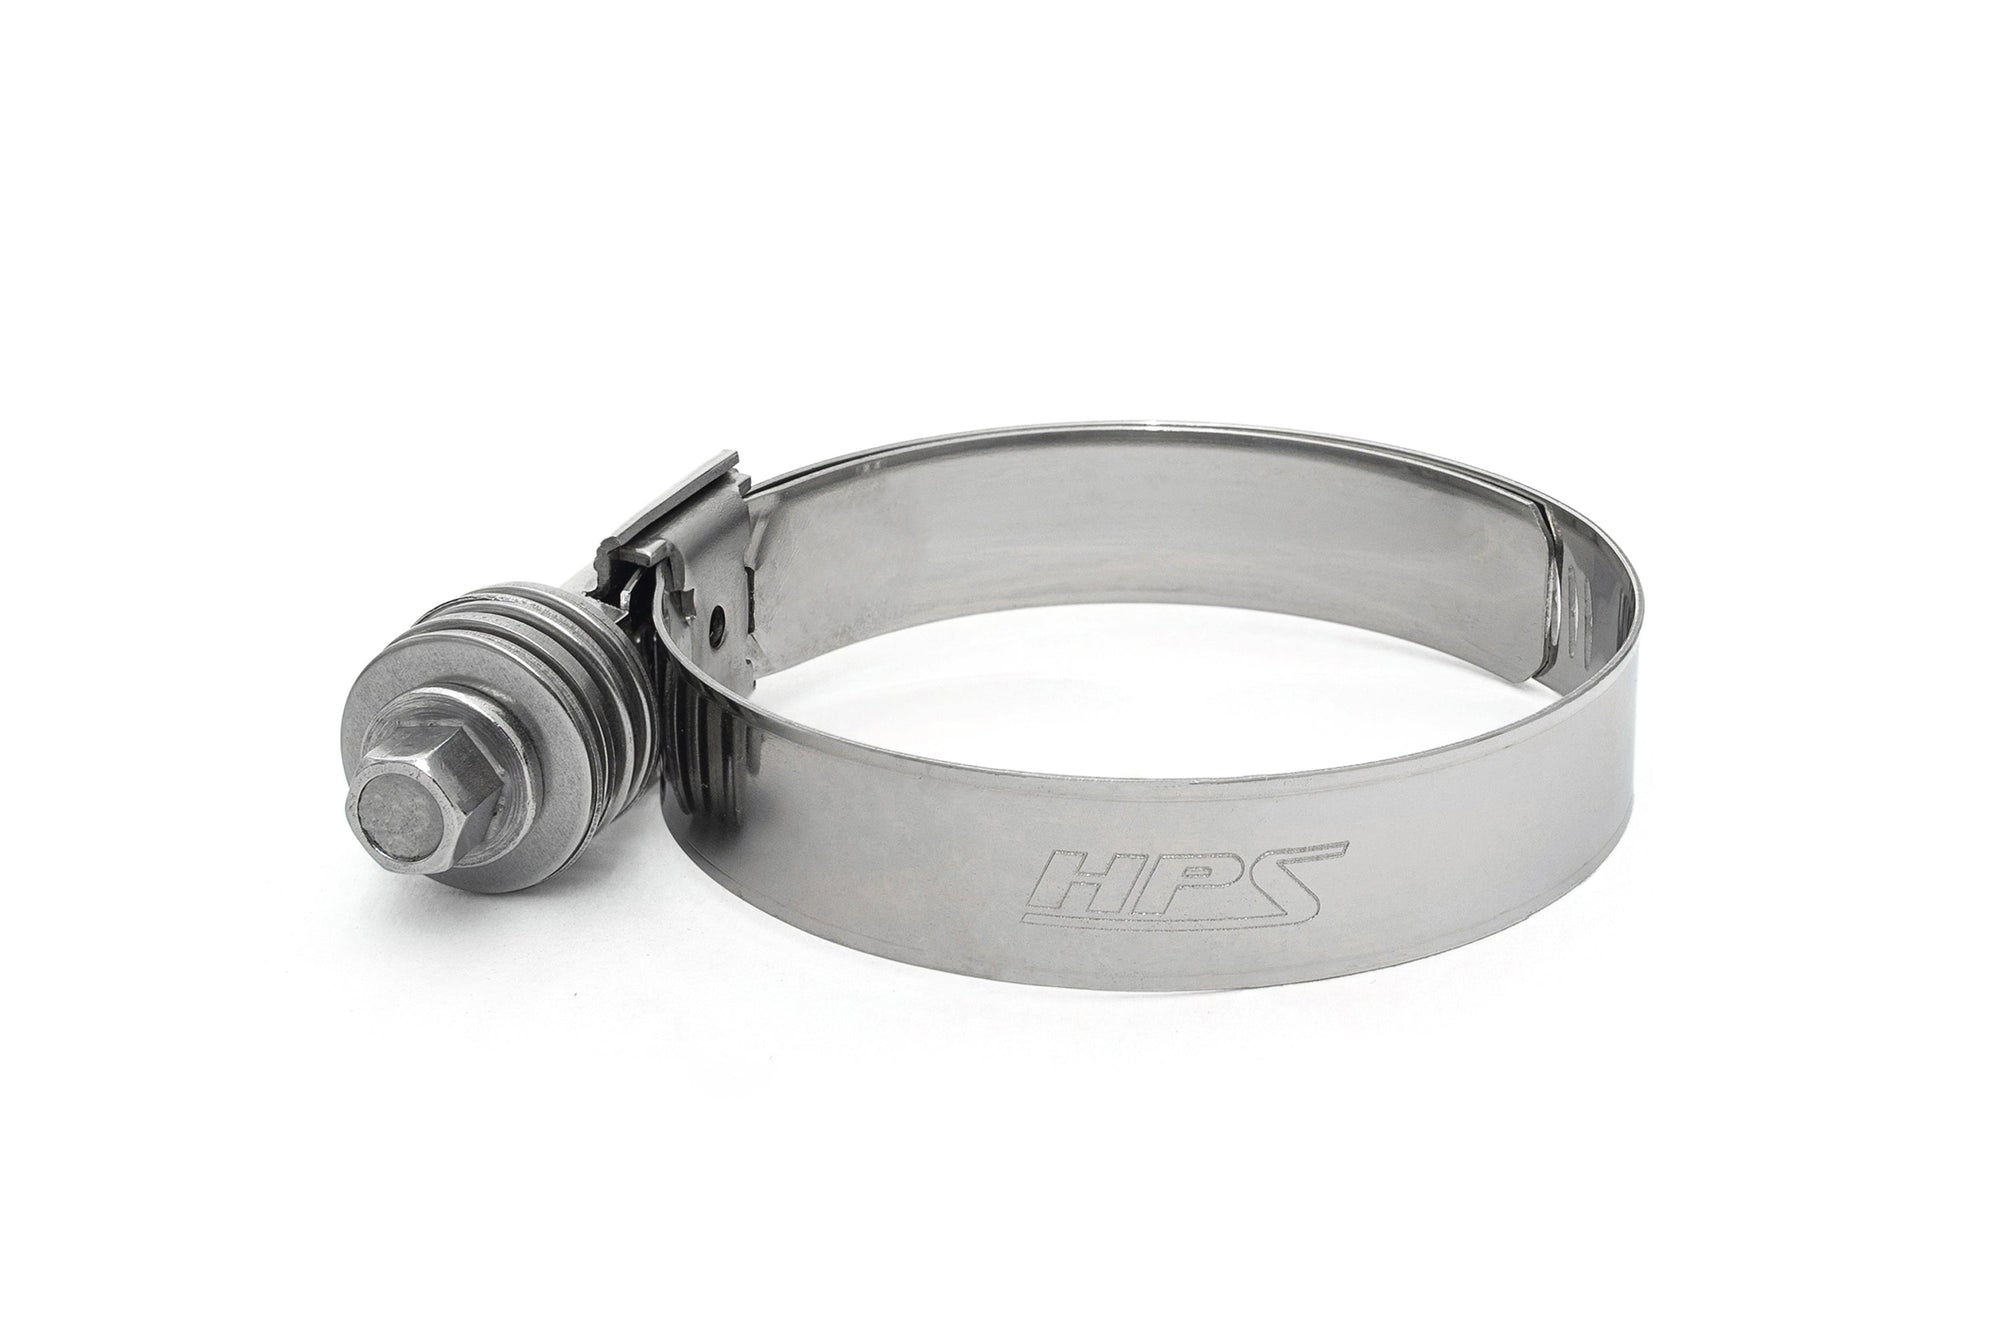 HPS Stainless Steel Heavy Duty Constant Tension Hose Clamp CTHD-712 fits 6-1/2" inch silicone hose charge air intake turbo cac intercooler pipe